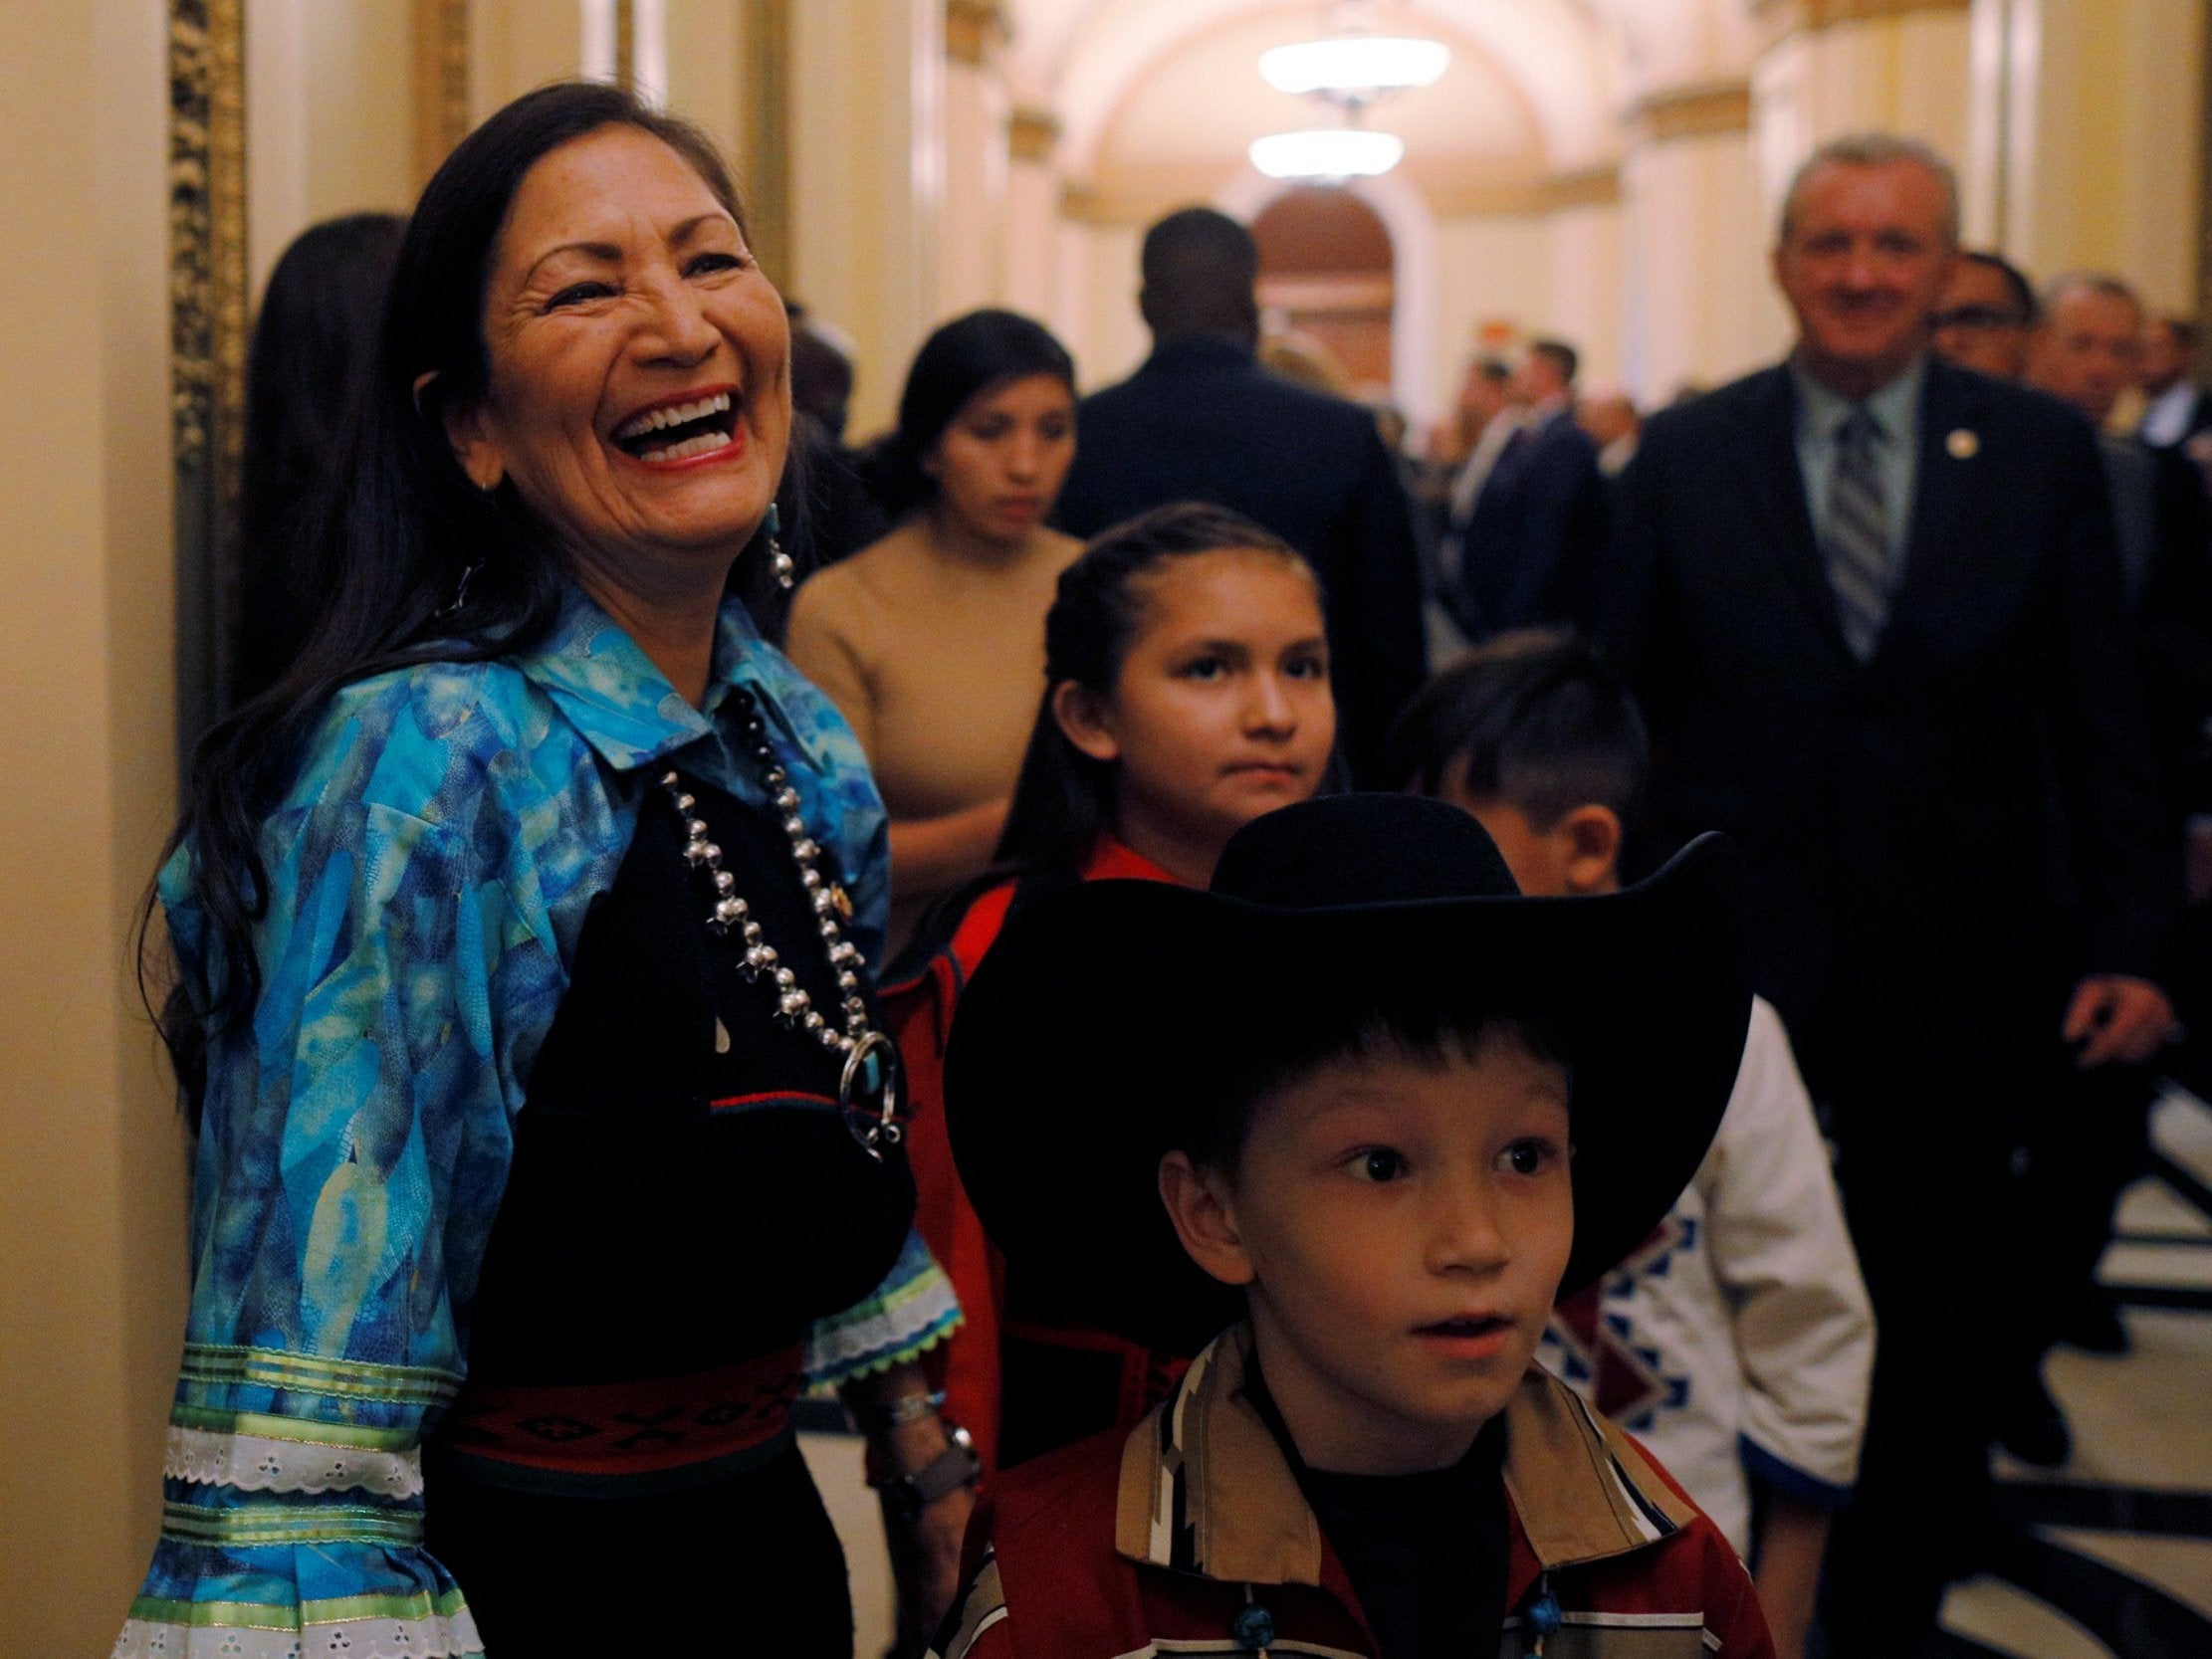 Haaland is also one of a record-breaking 102 women to join the House of Representatives this season